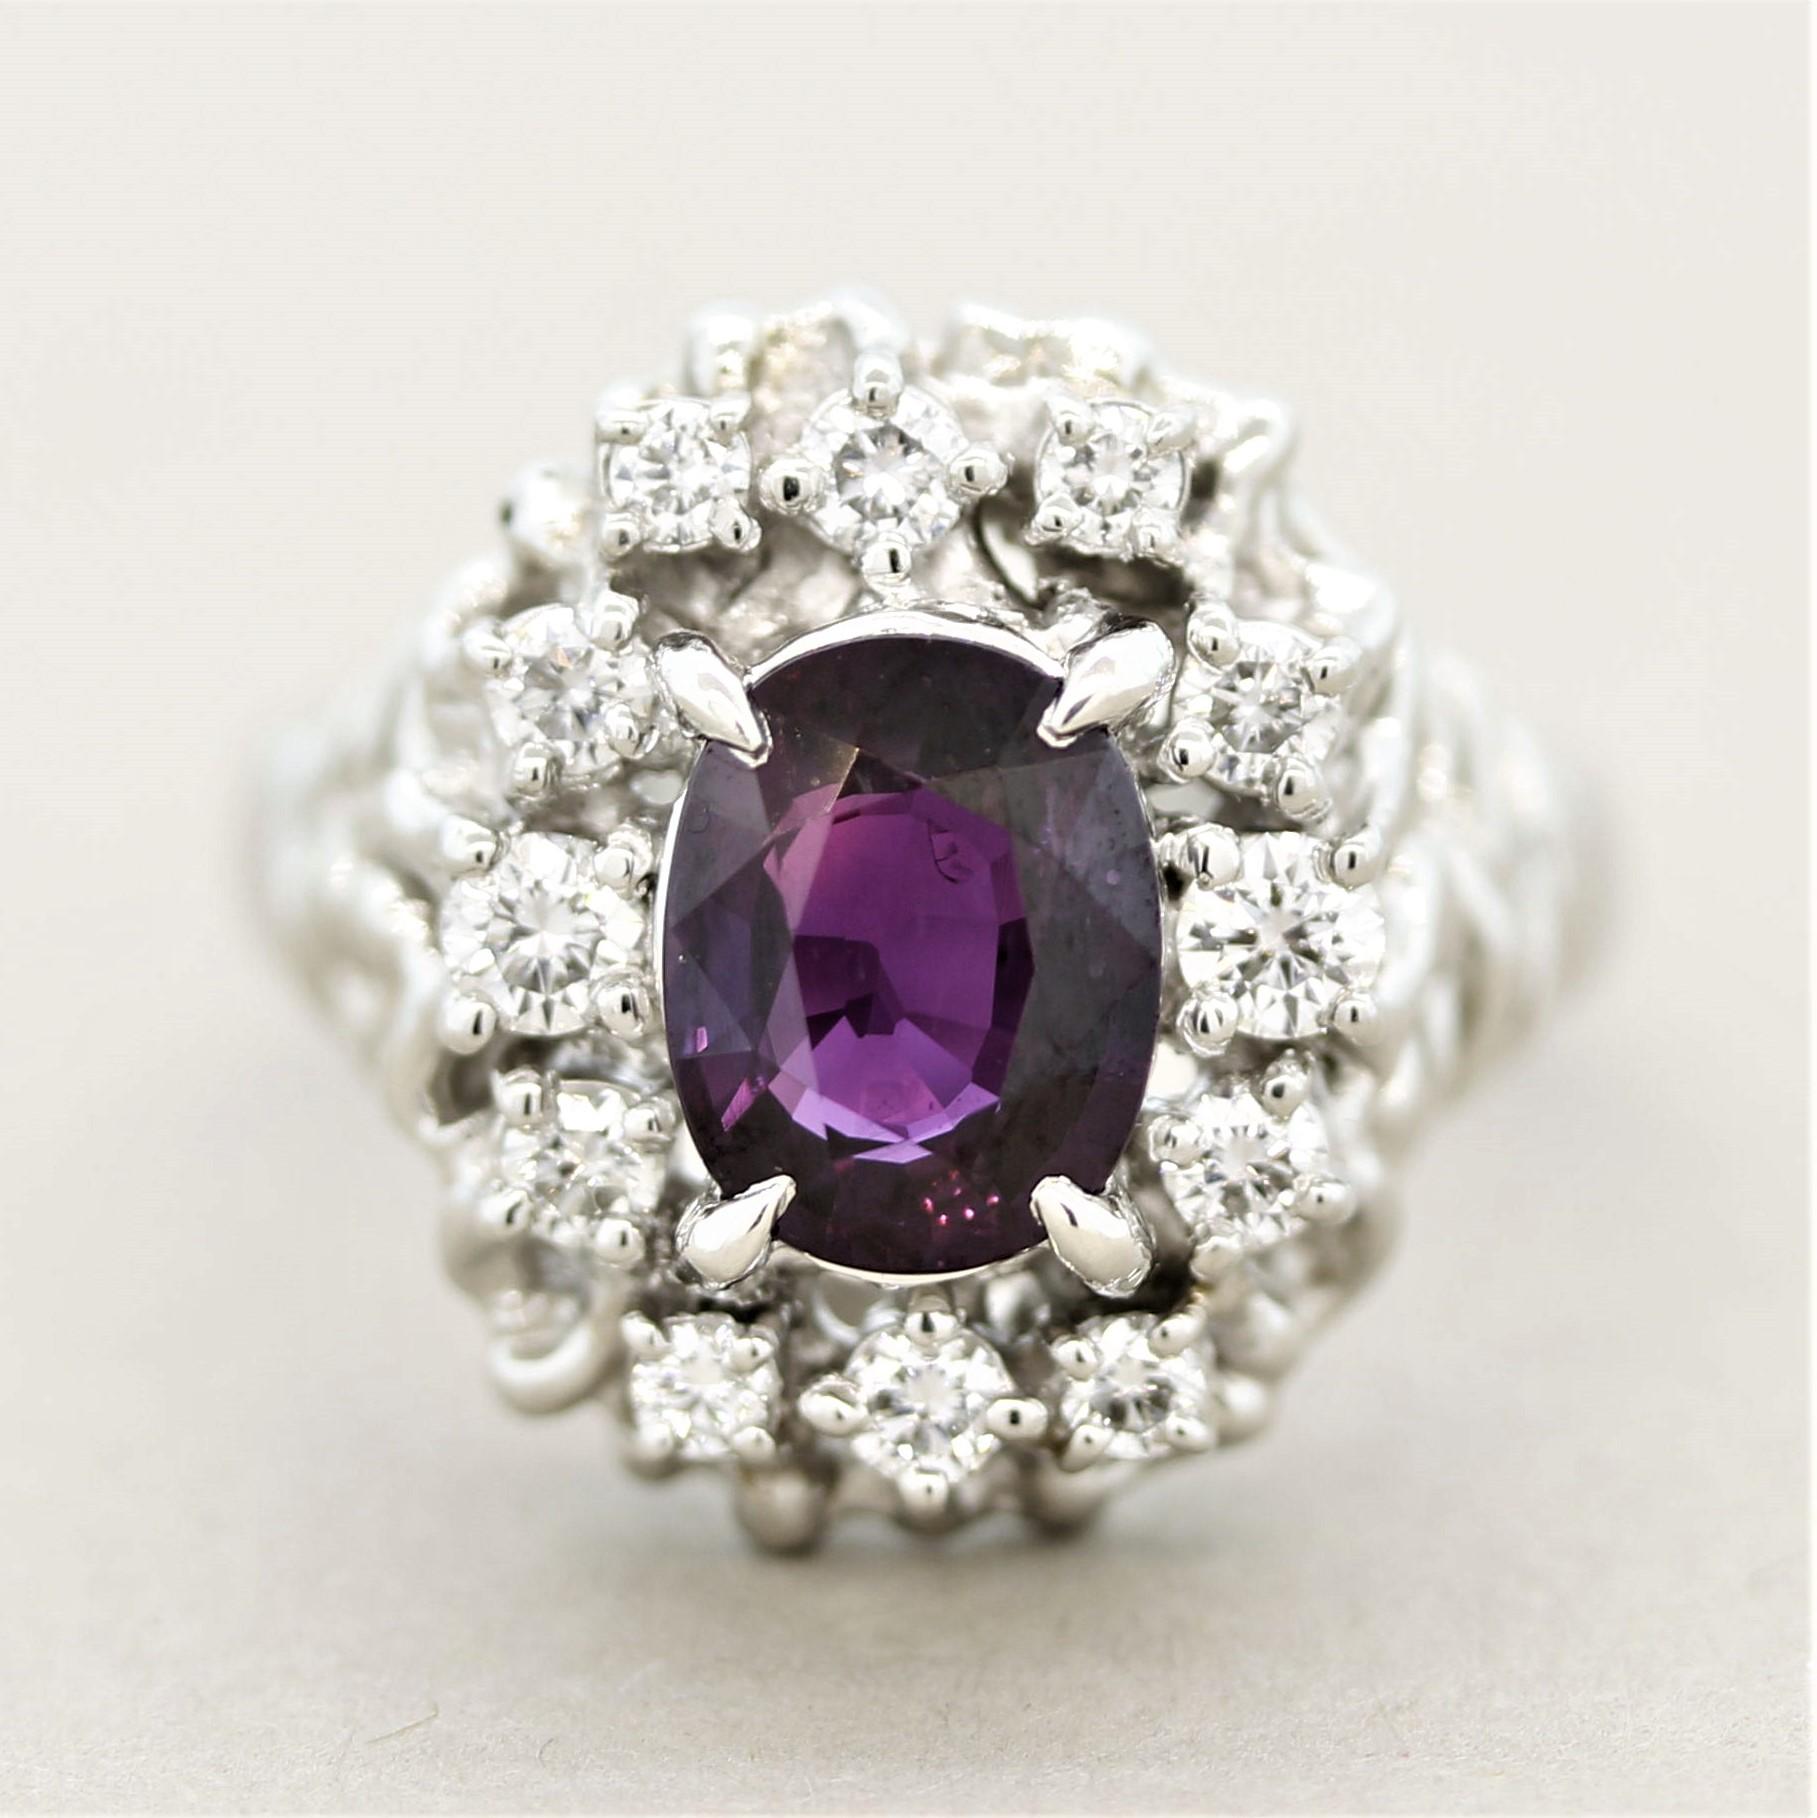 Featuring an extra fine purple sapphire, this sleek platinum ring is one of our favorites! The gem sapphire weighs 2.18 carats and has a bright vivid purple color with excellent brilliance which is due to its fantastic cutting as well as it being